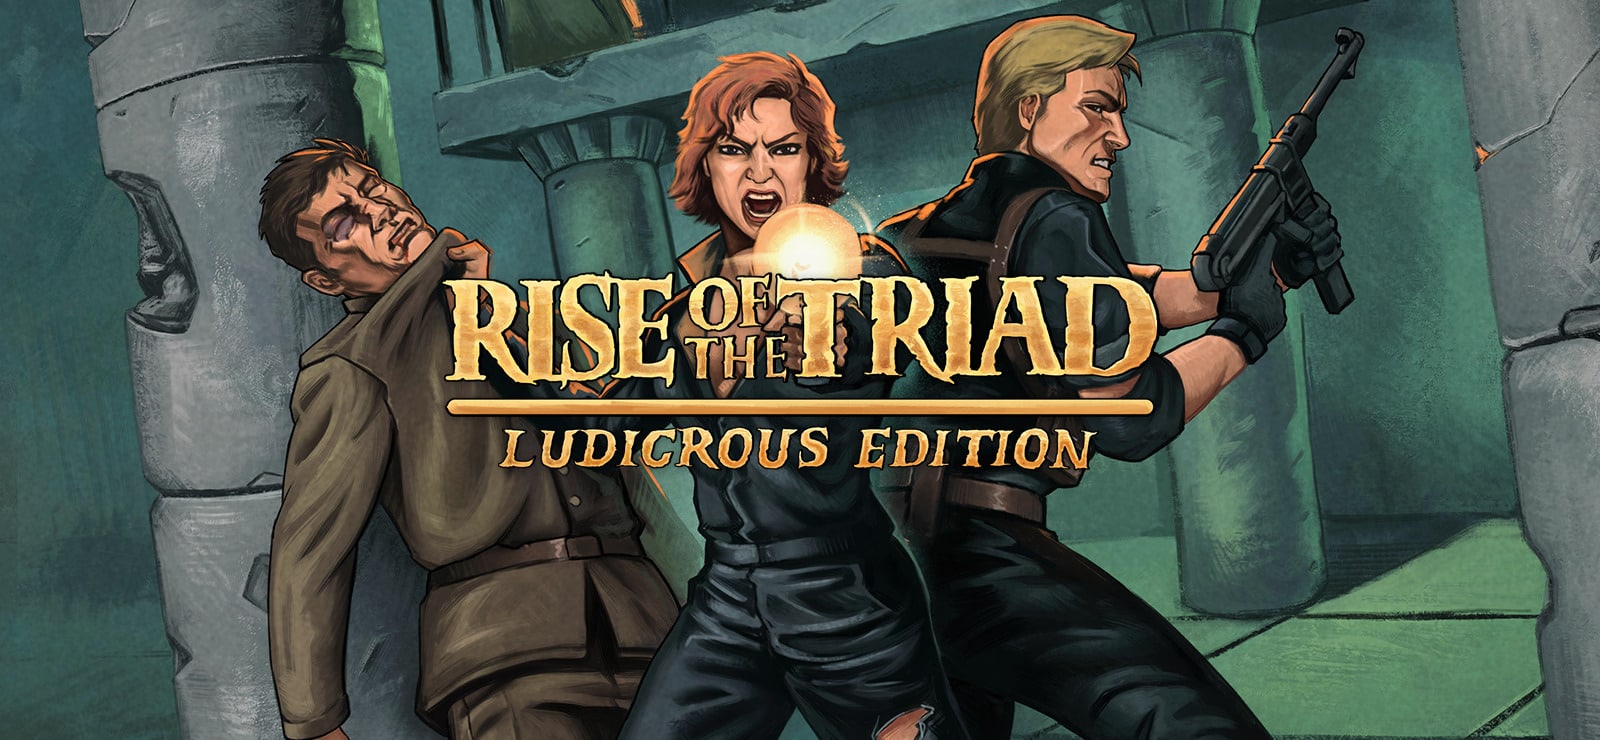 Rise-of-the-Triad